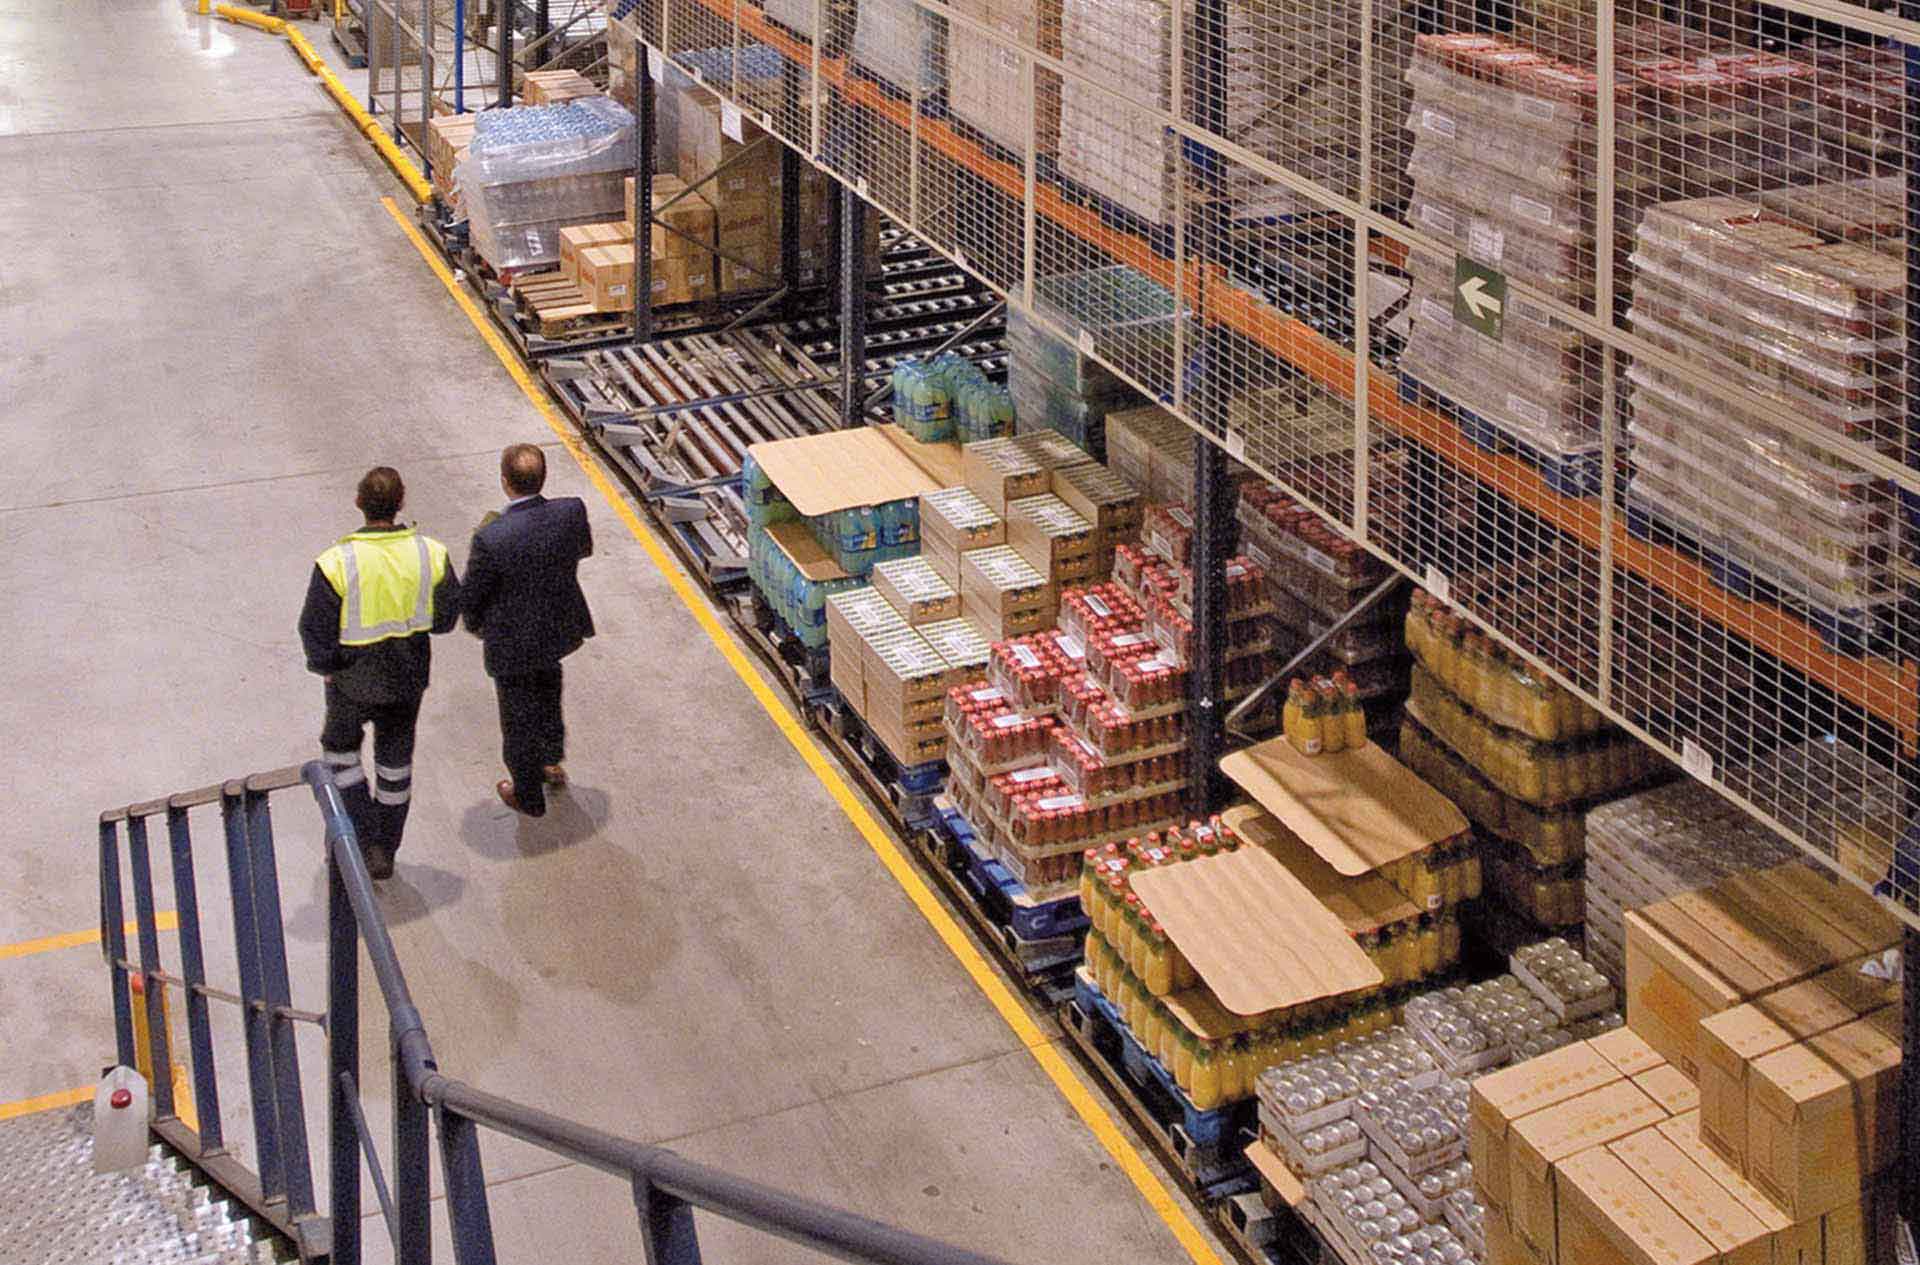 Workers walking and discussing the warehouse technologies of the future